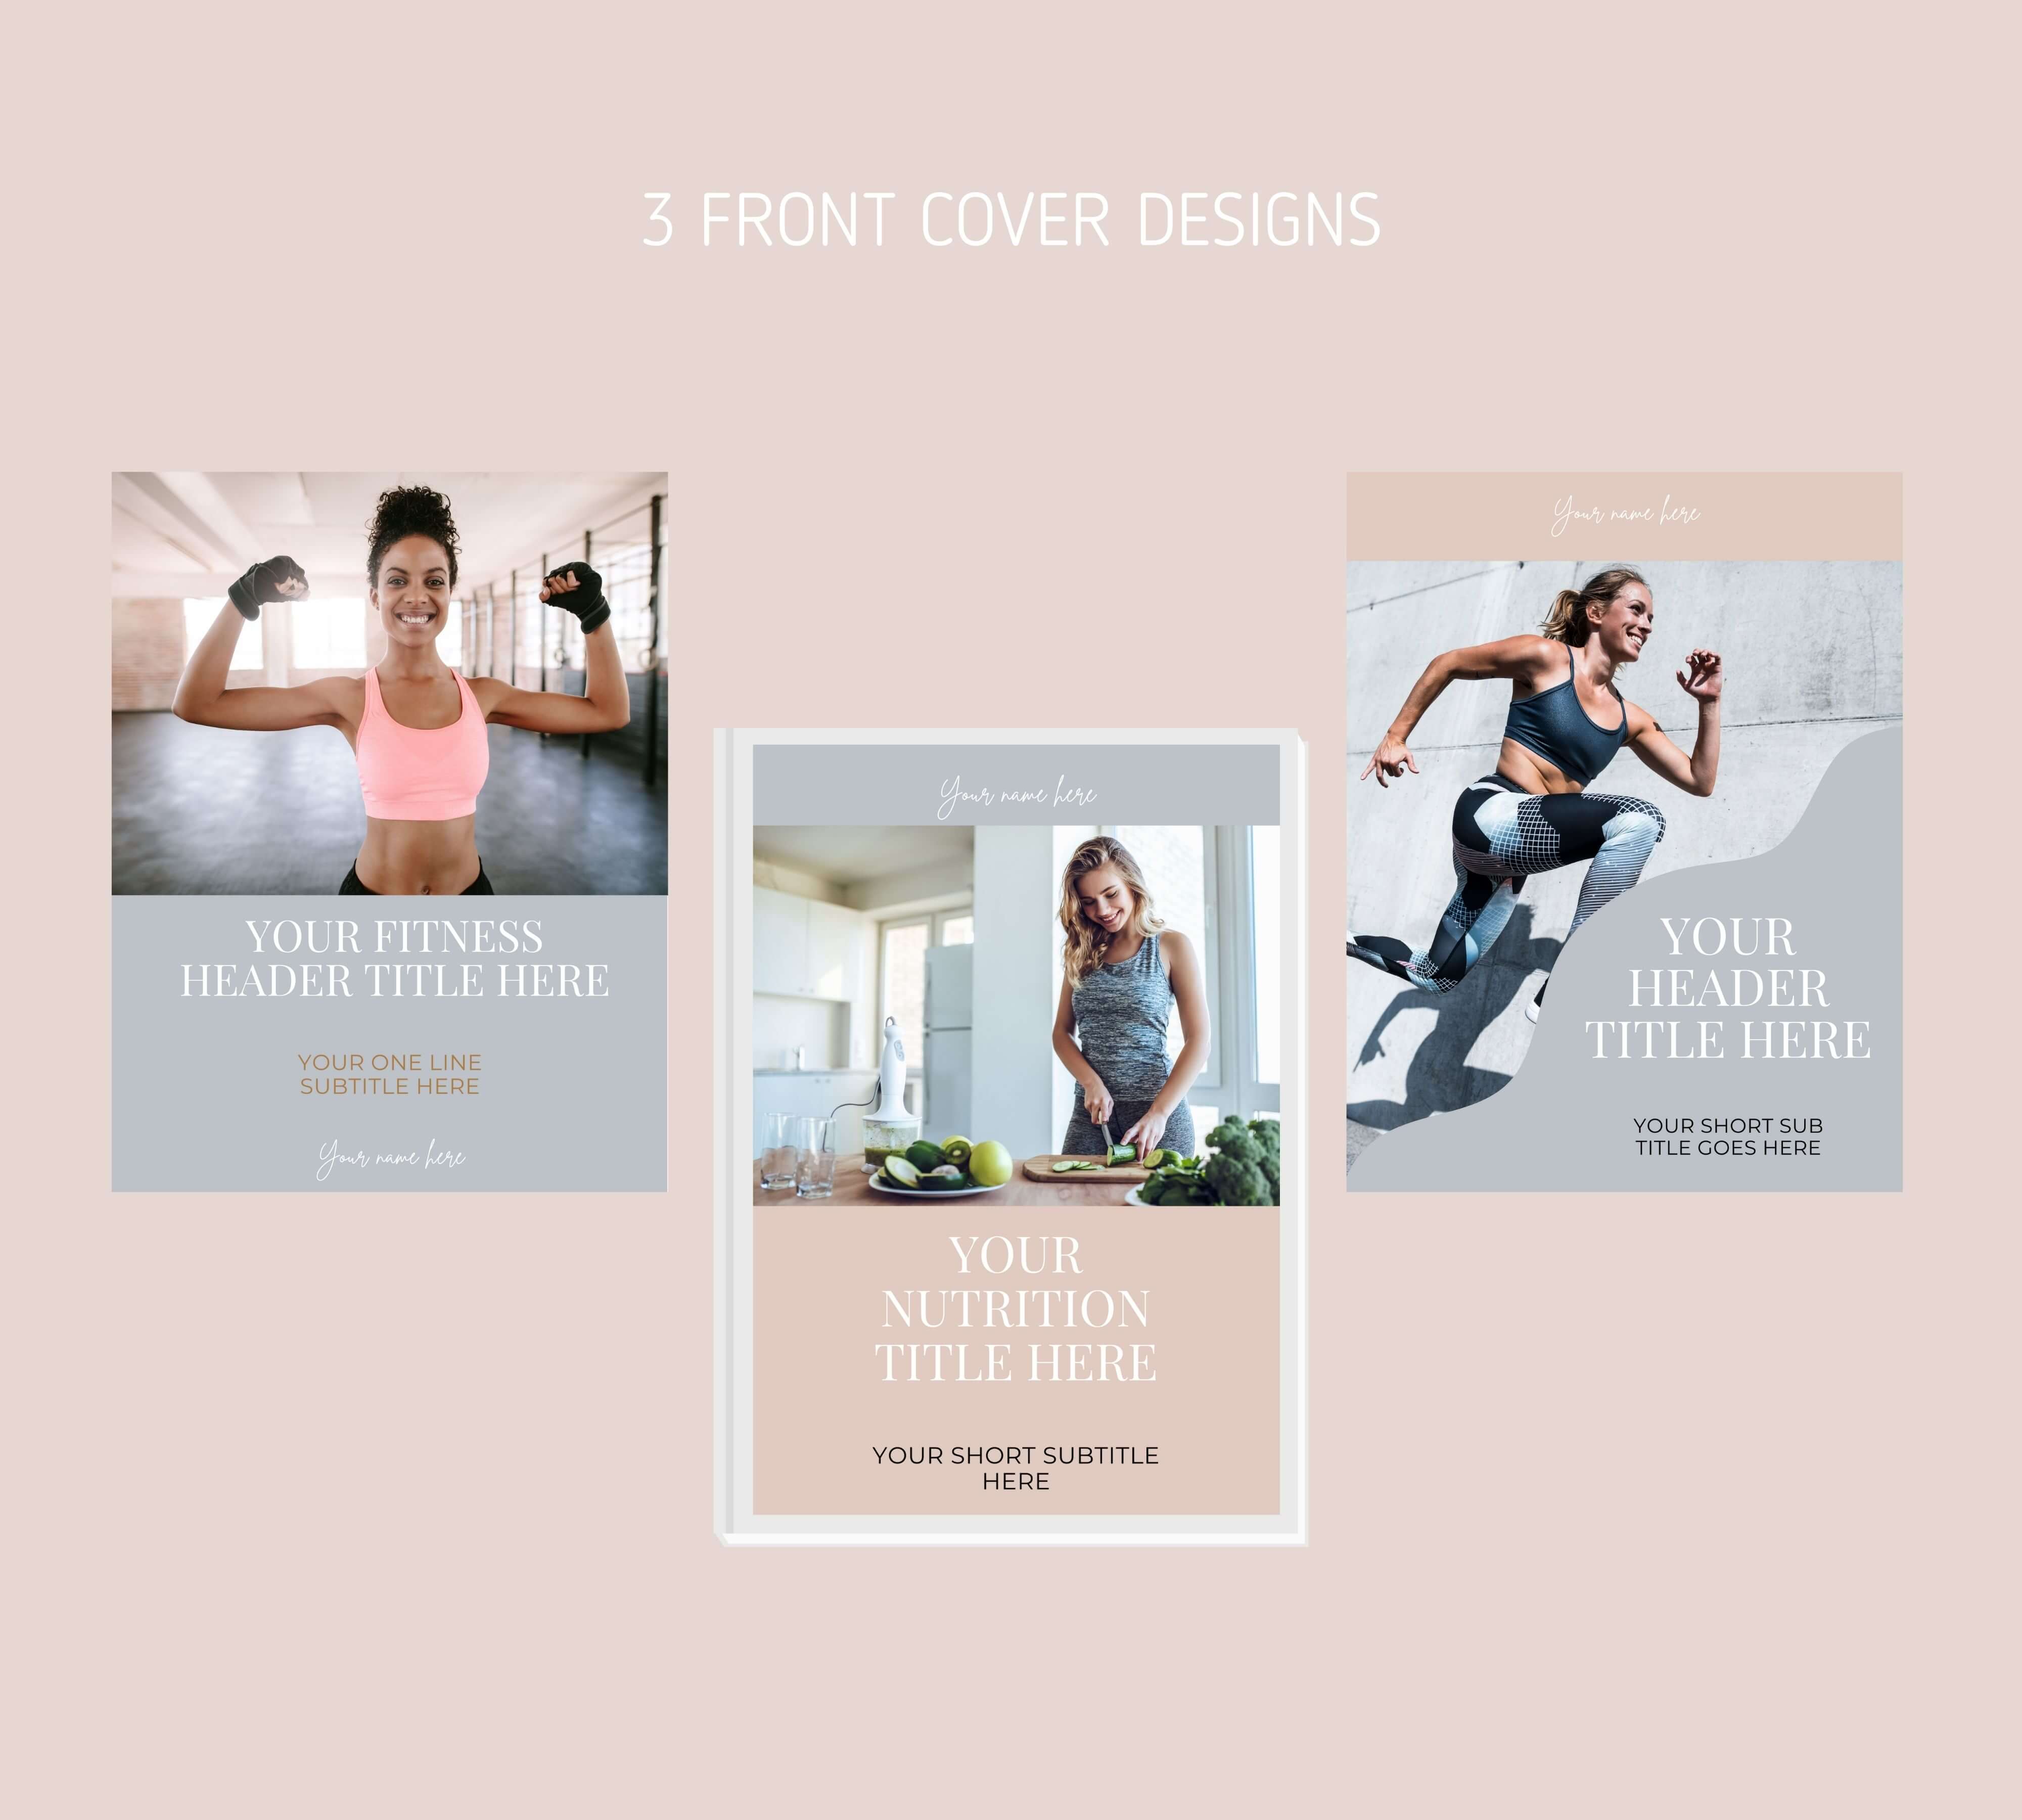 Fitness & Nutrition lead magnet template